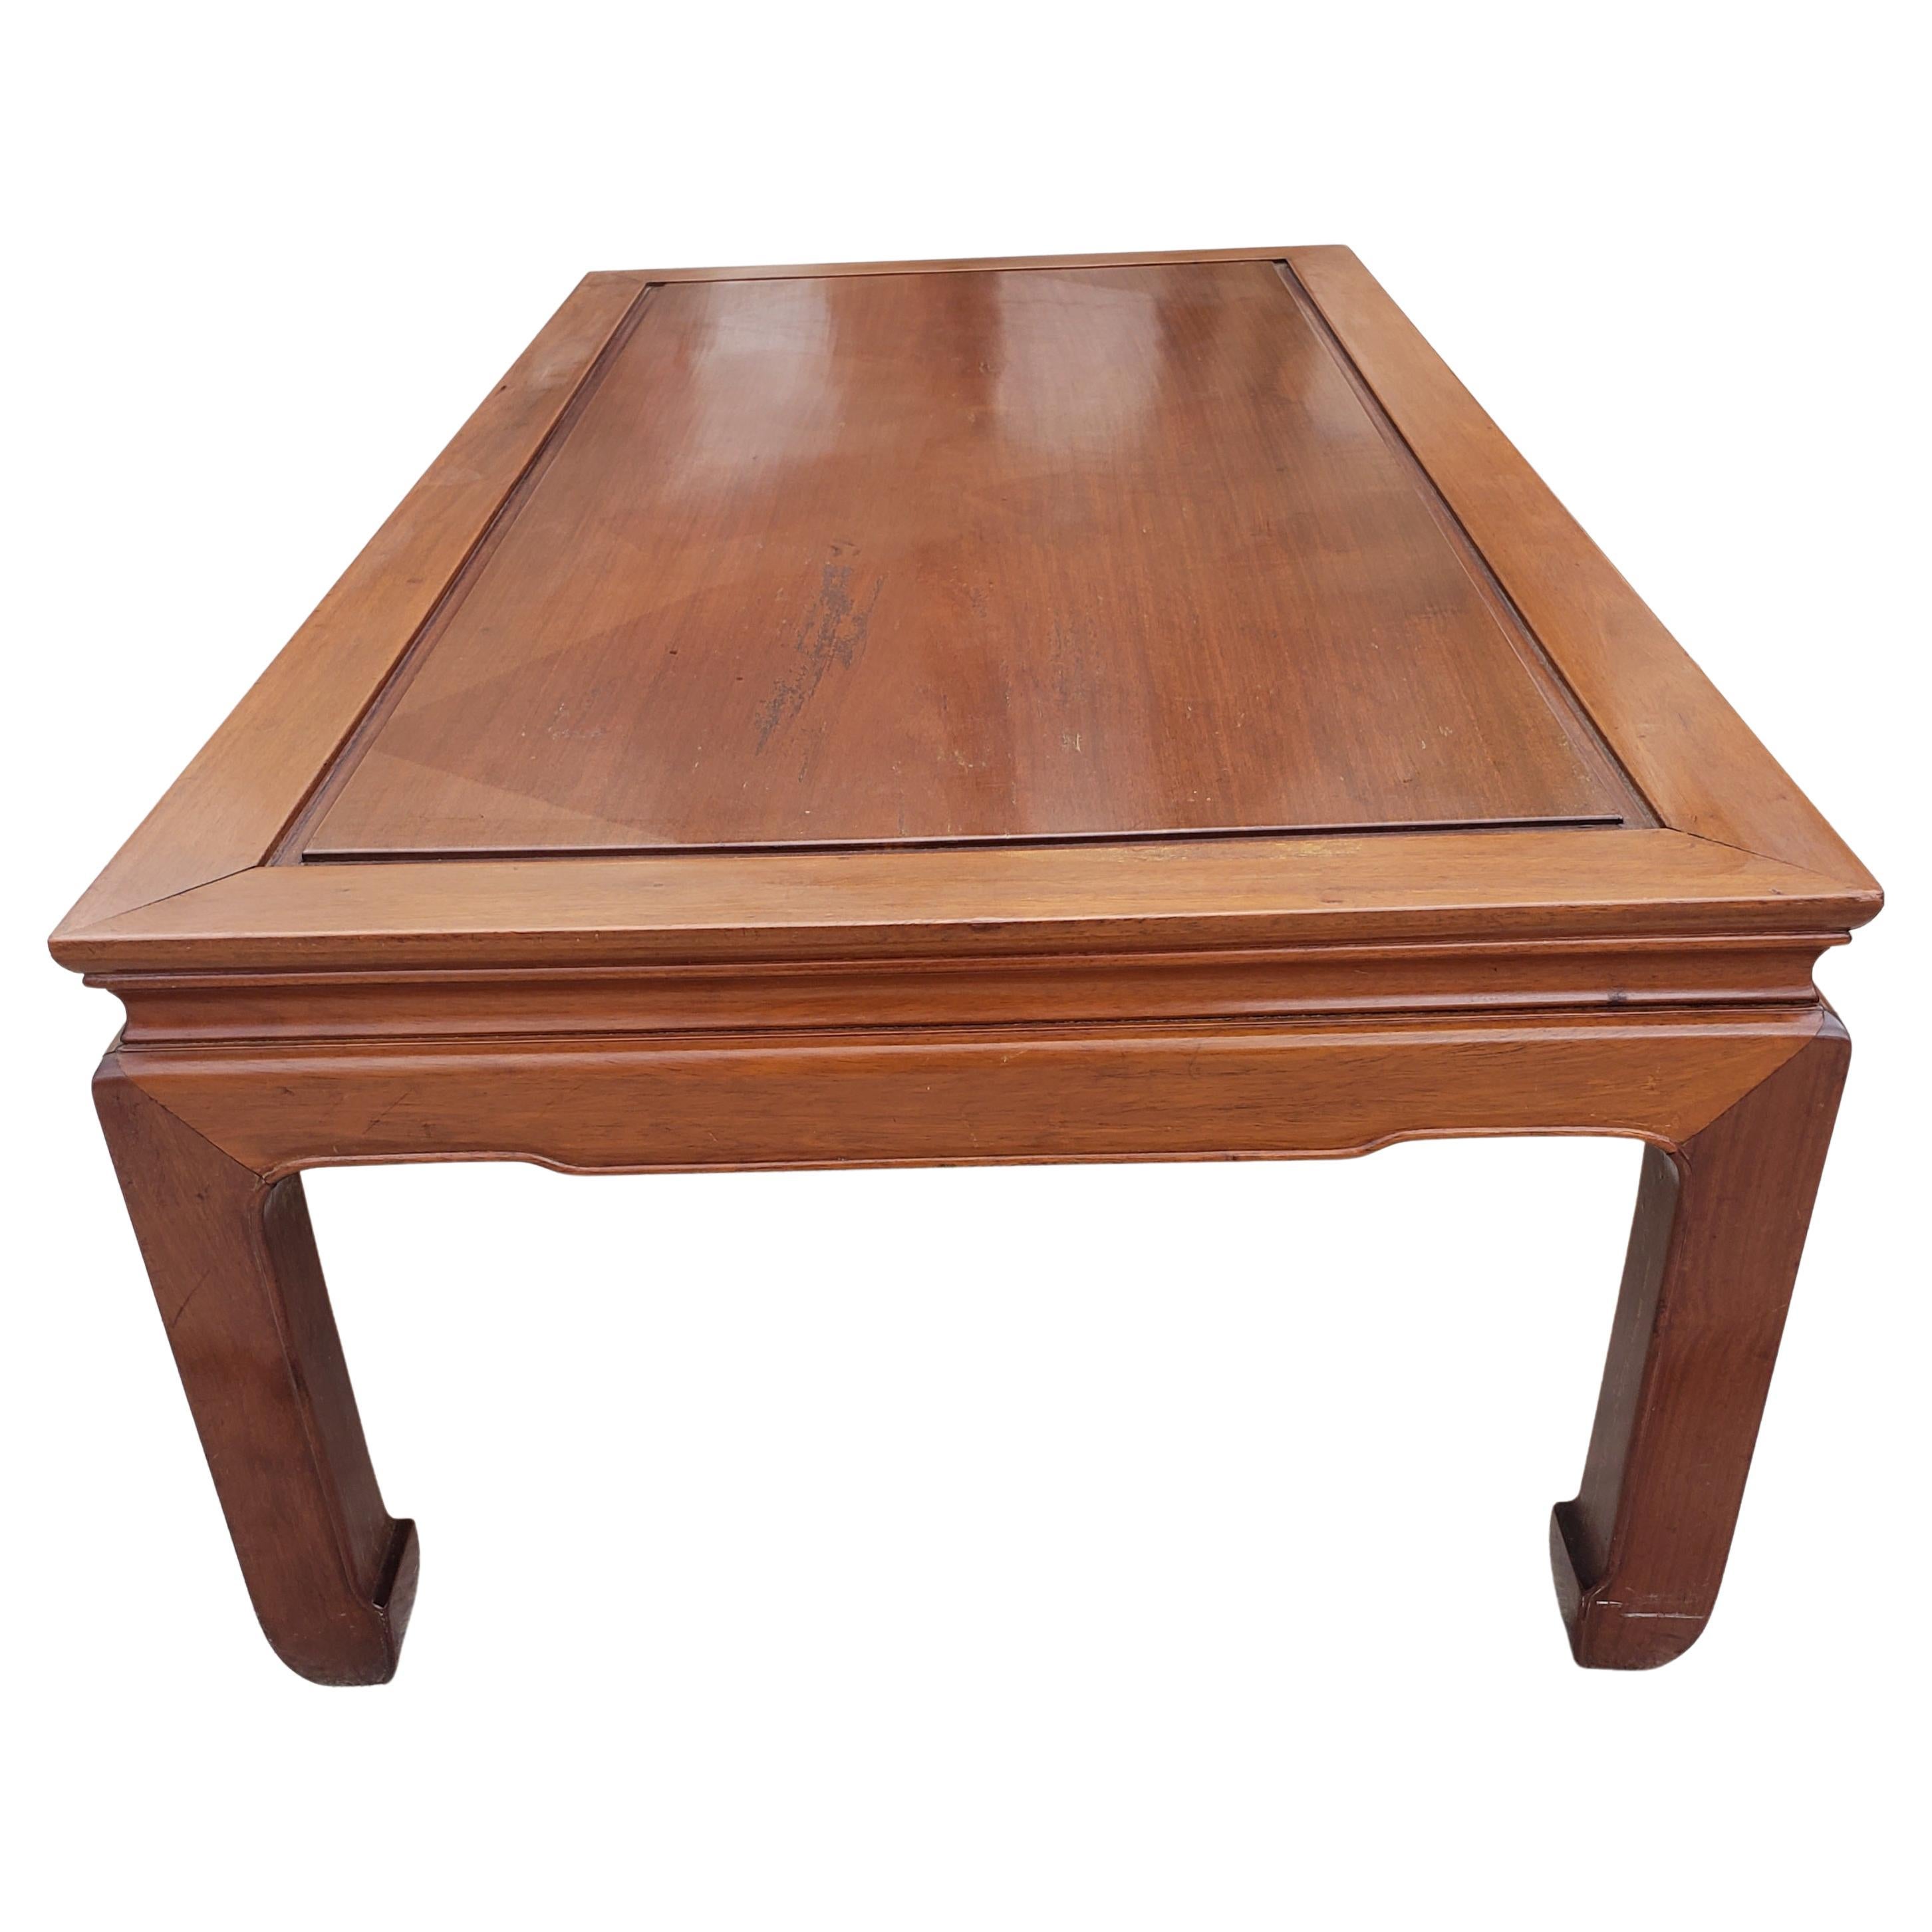 Solid rosewood in Ming style coffee table. Simple clean lines, Asian key design on the edges. Hand-applied natural rosewood finish enhances the beauty of the wood grains. This amazing table is made in the 50s era. It's all hand-built with Chinese